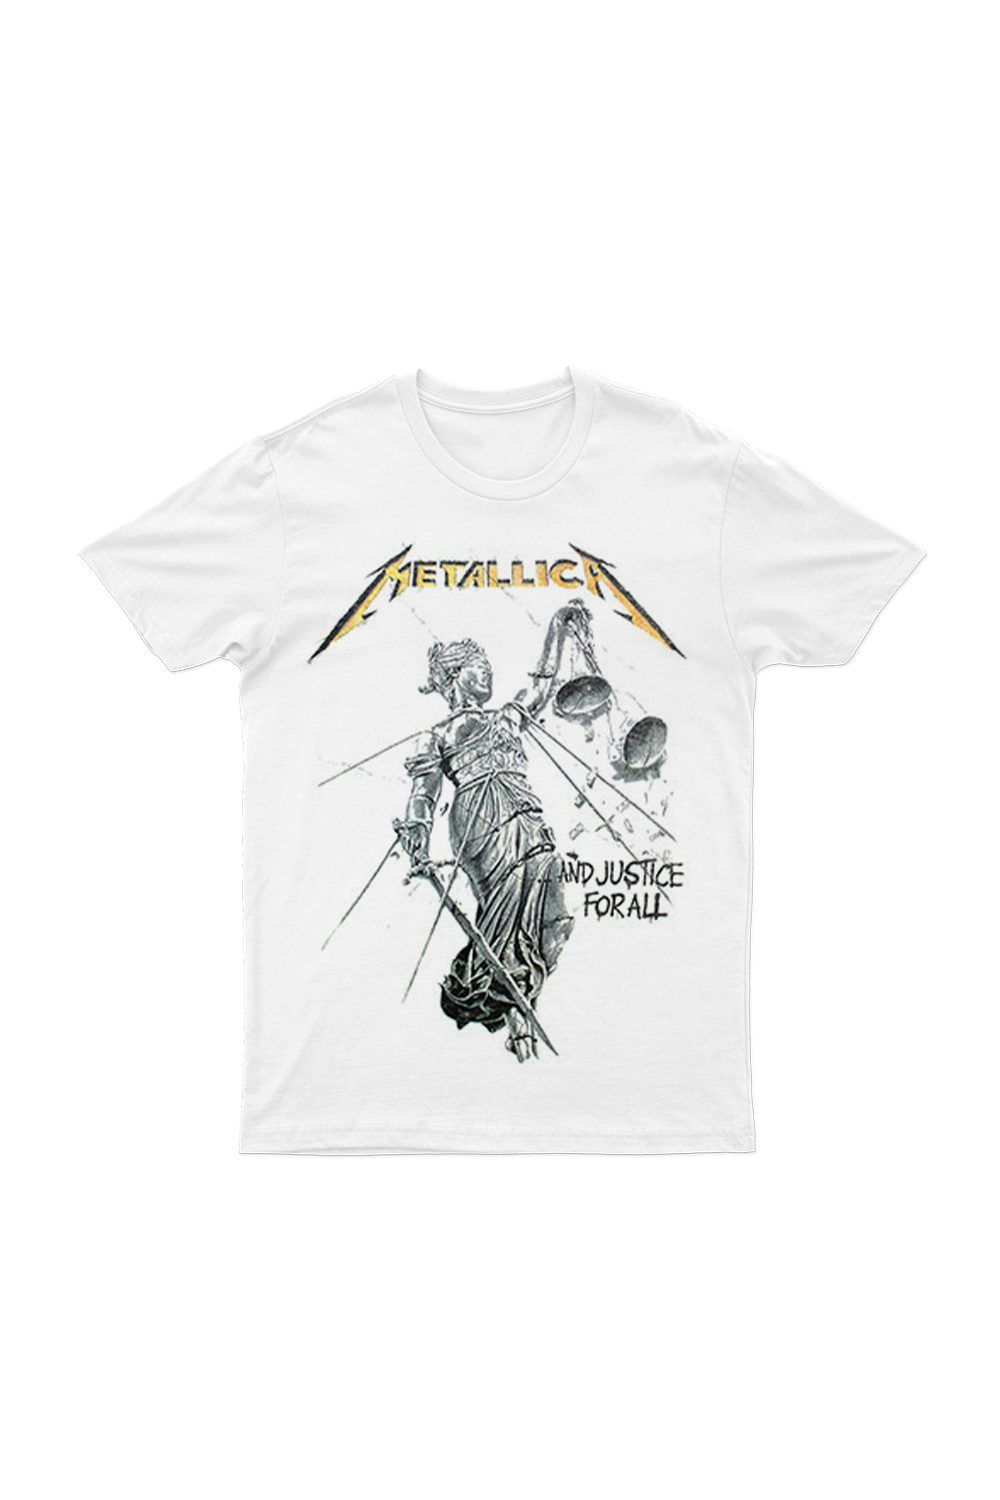 Metallica Justice For All White Tshirt